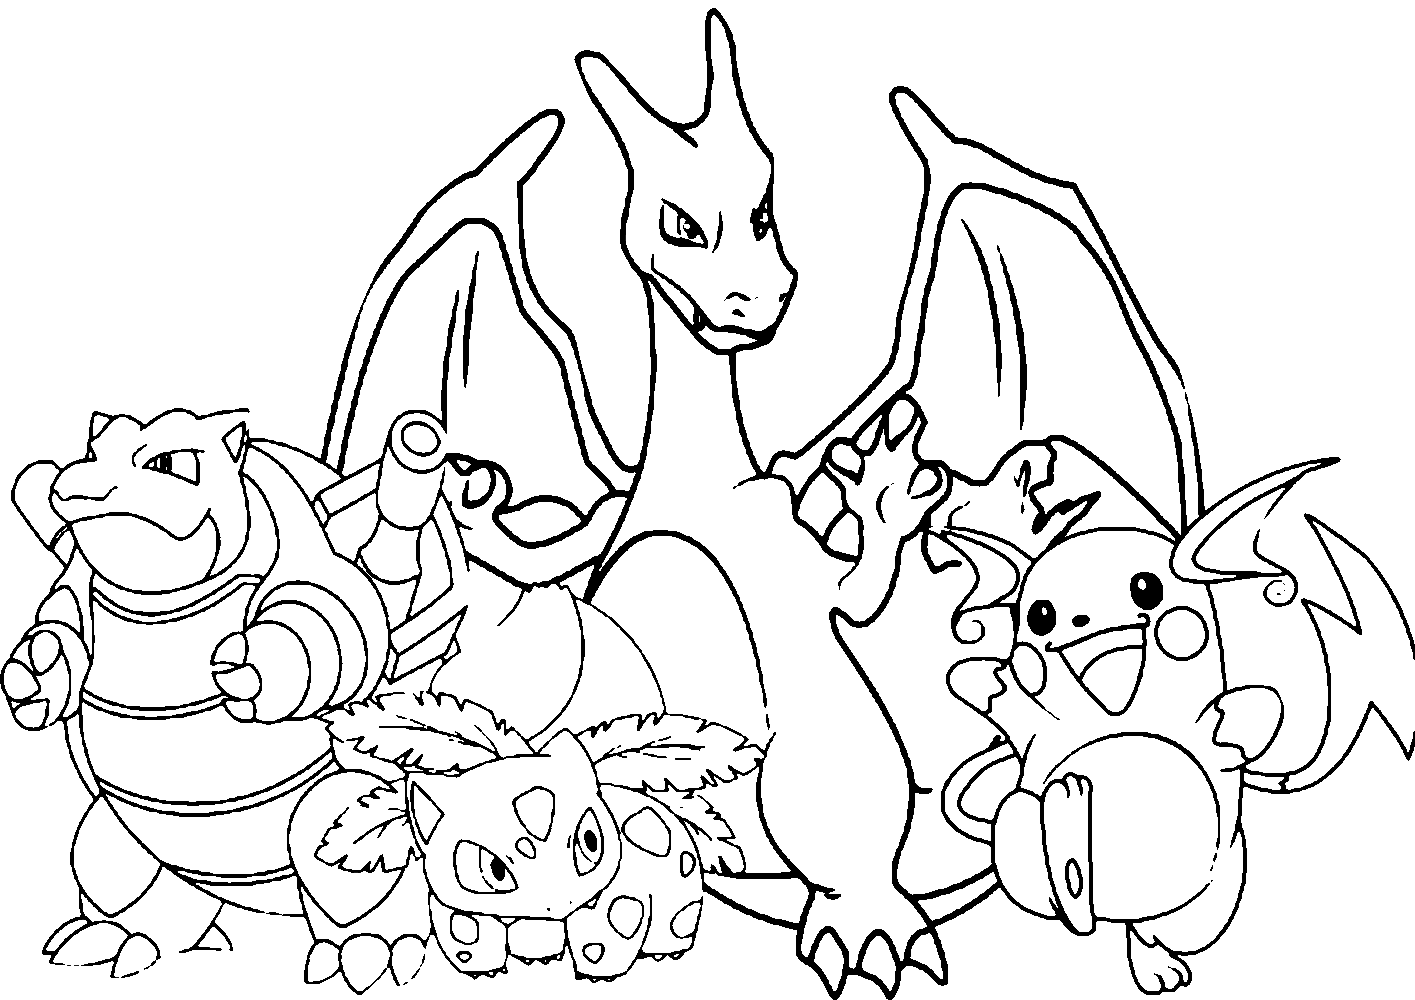 Pokemon Coloring Pages: Printable PDF (Updated) » Print Color Craft